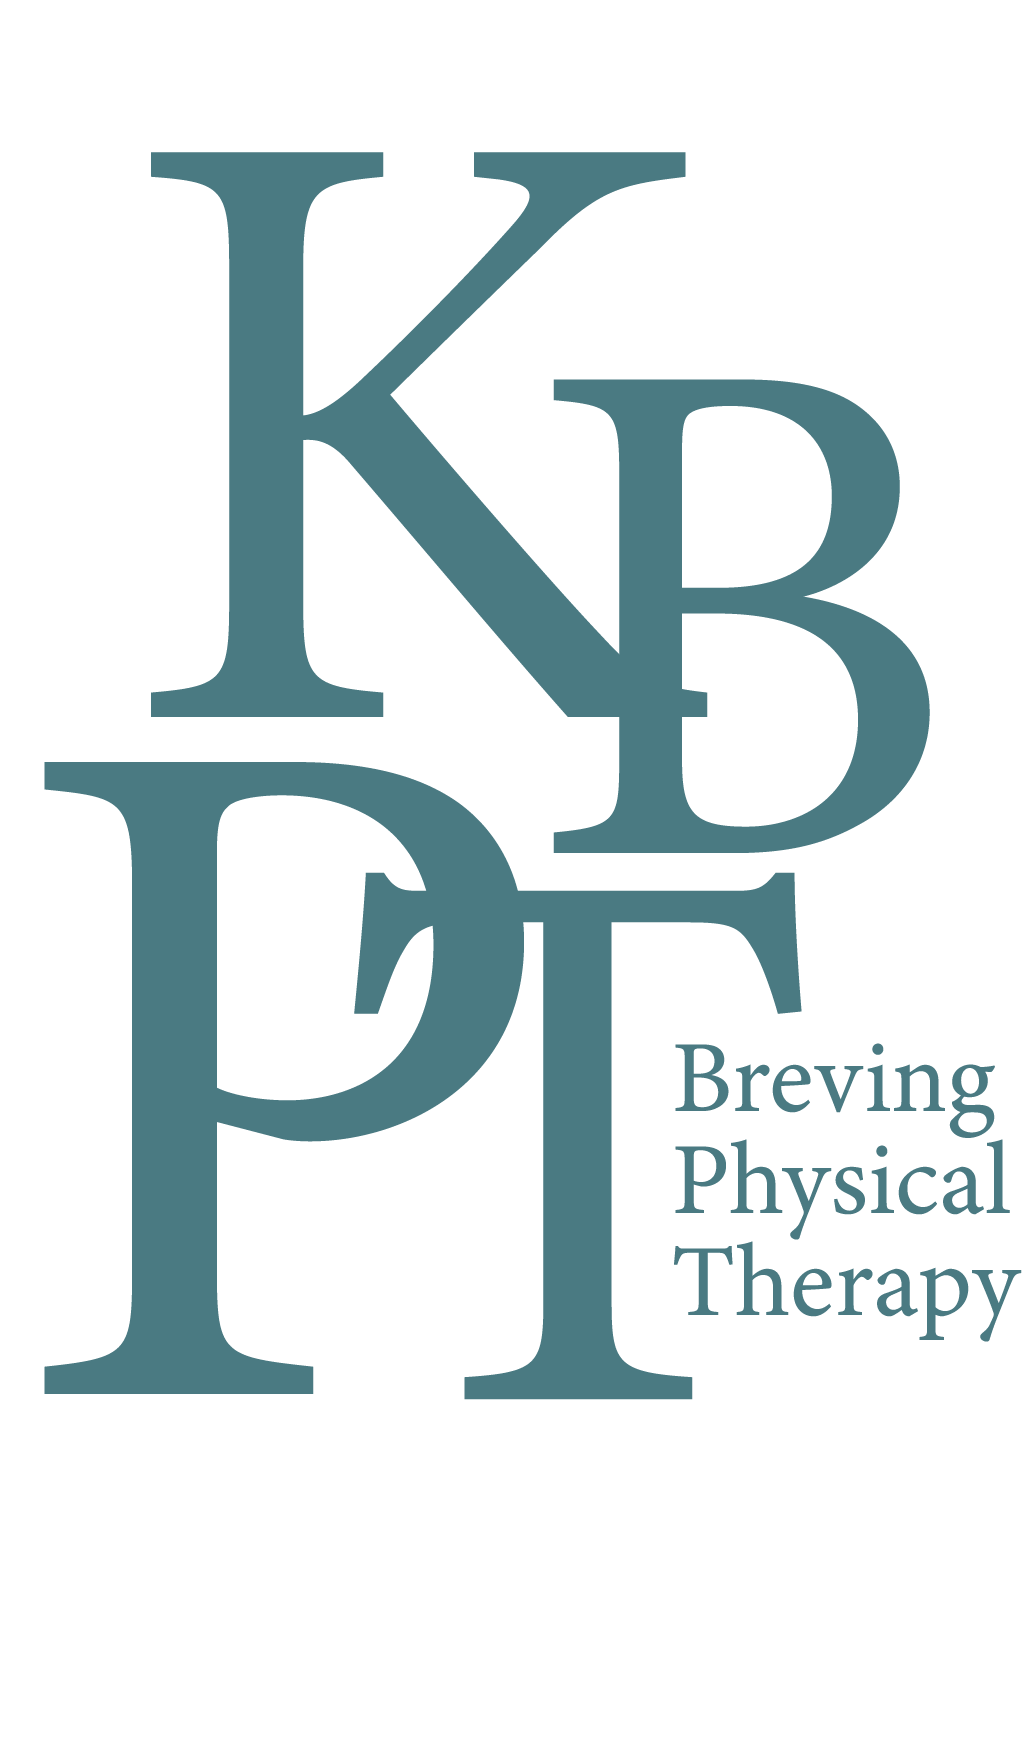 Breving Physical Therapy